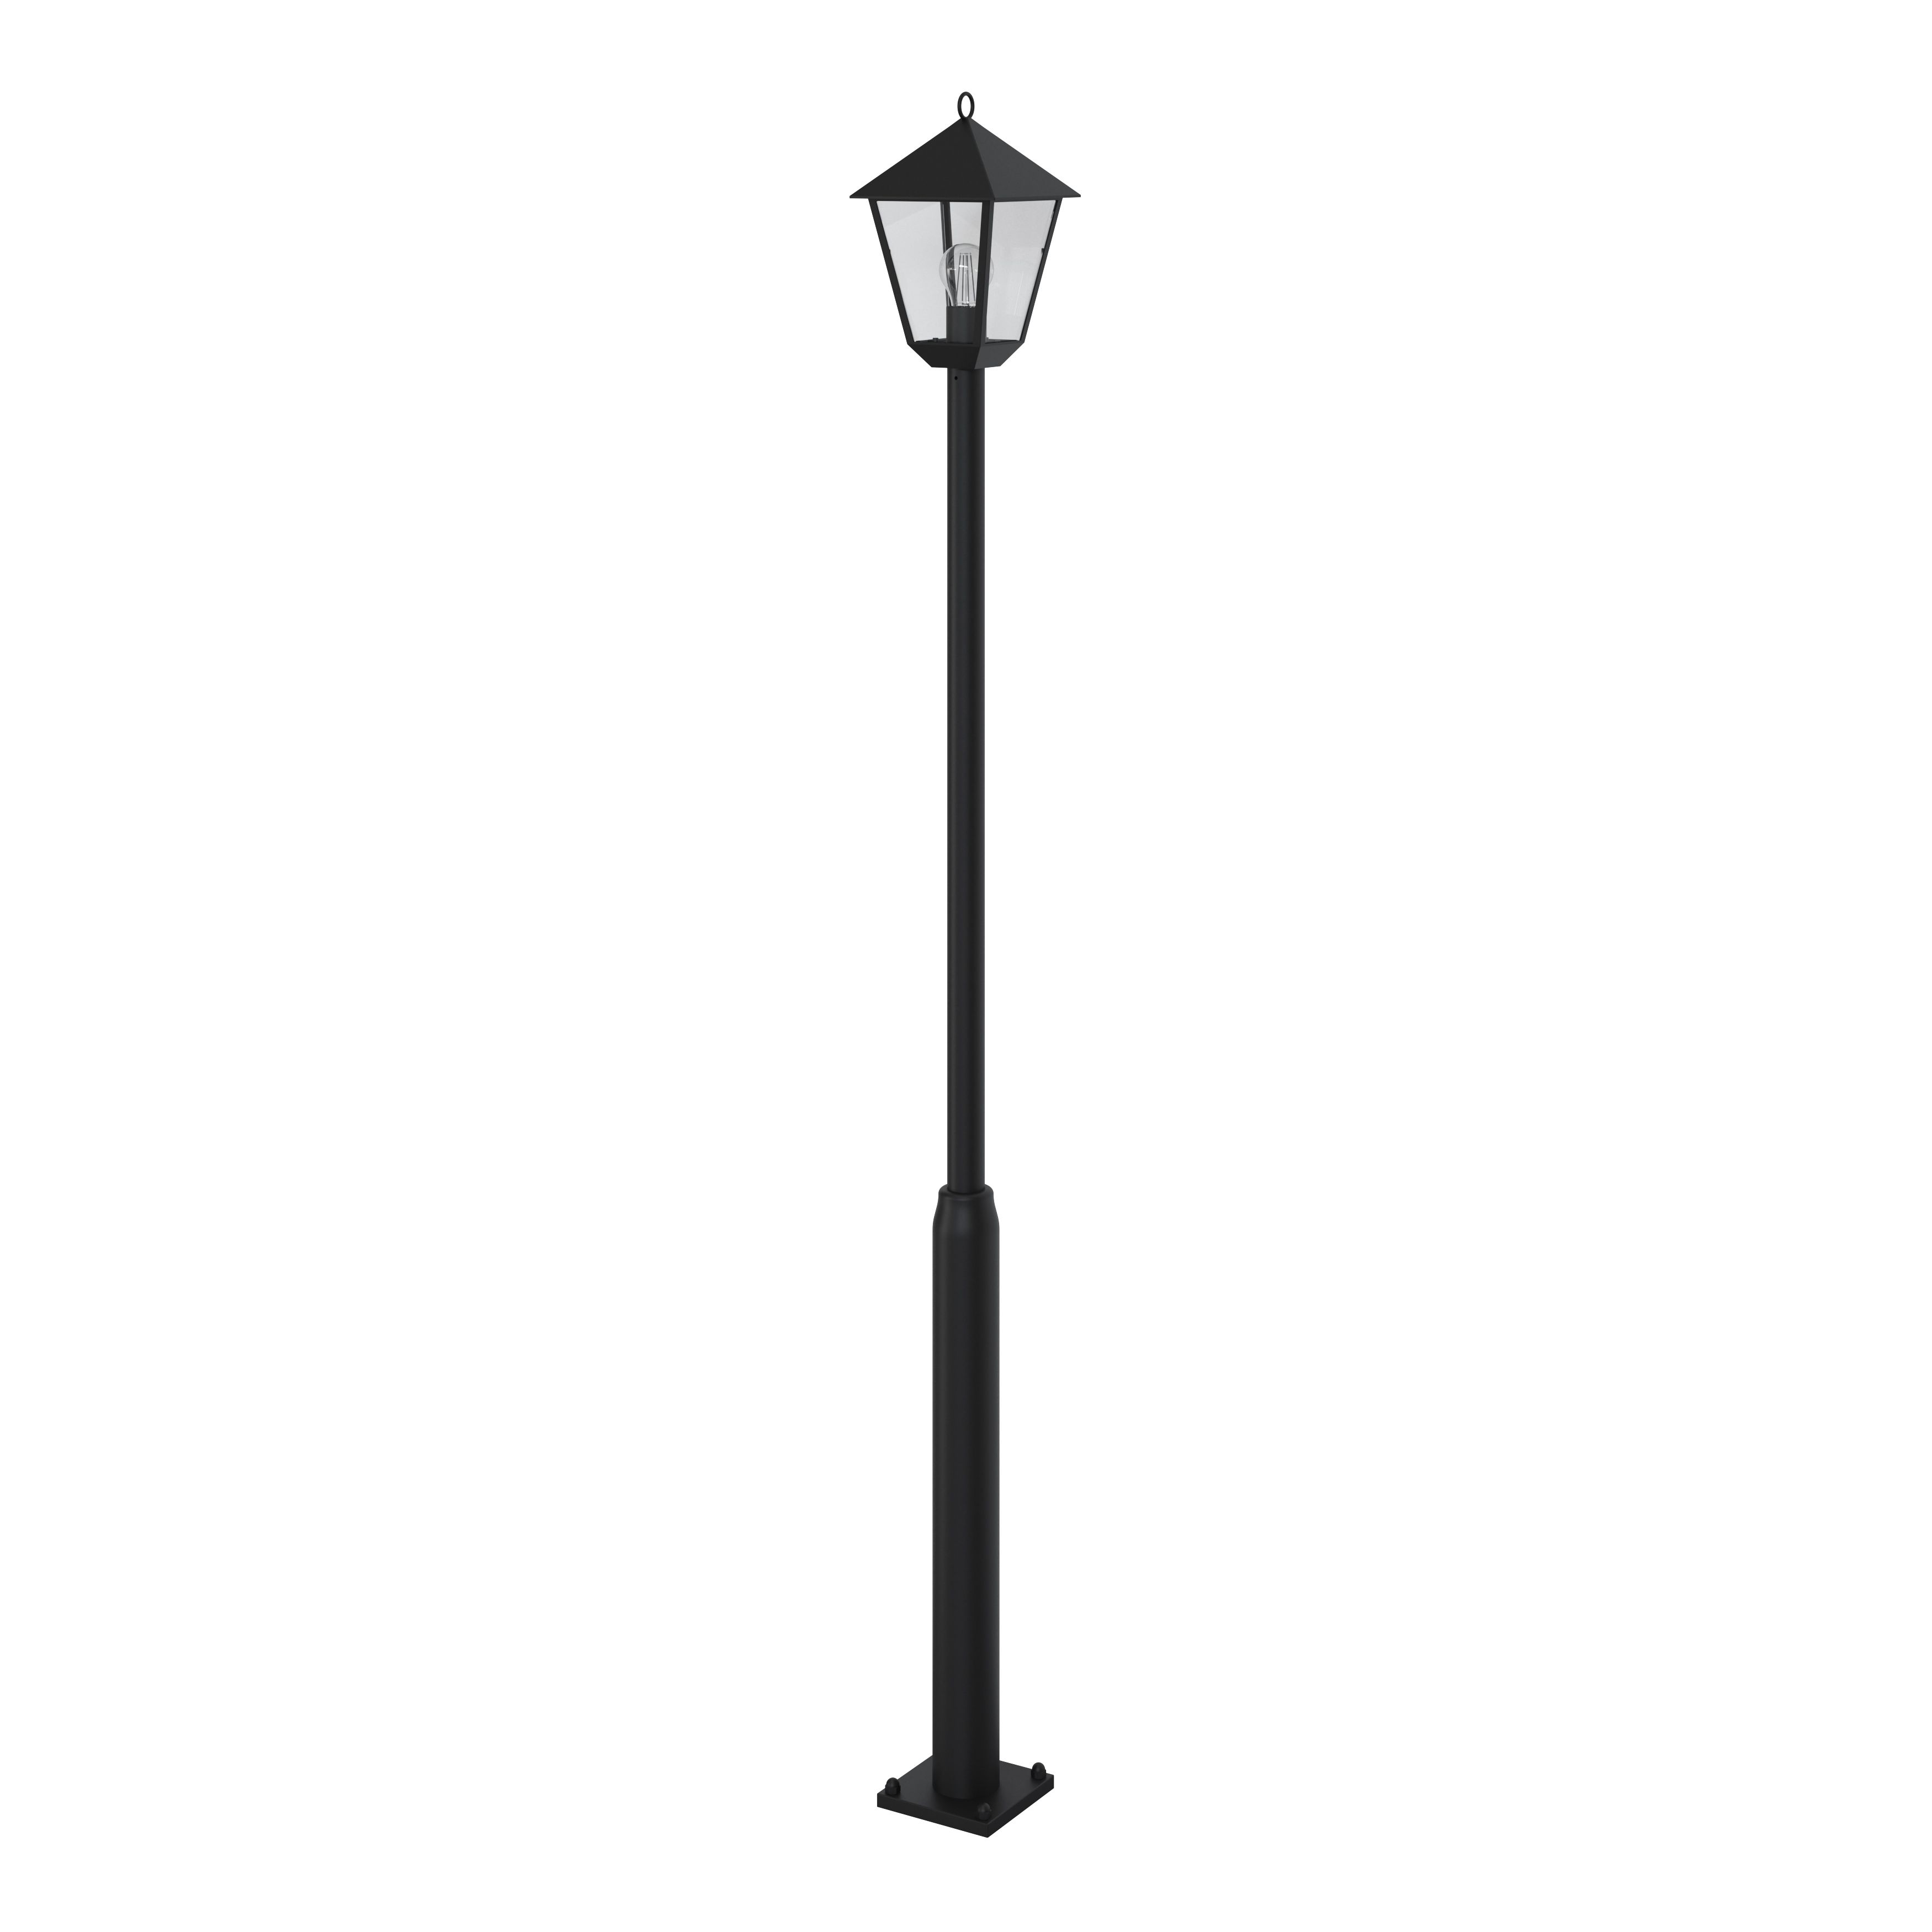 GoodHome Lantern Black Mains-powered 1 lamp Outdoor 4 faces Post light (H)2000mm